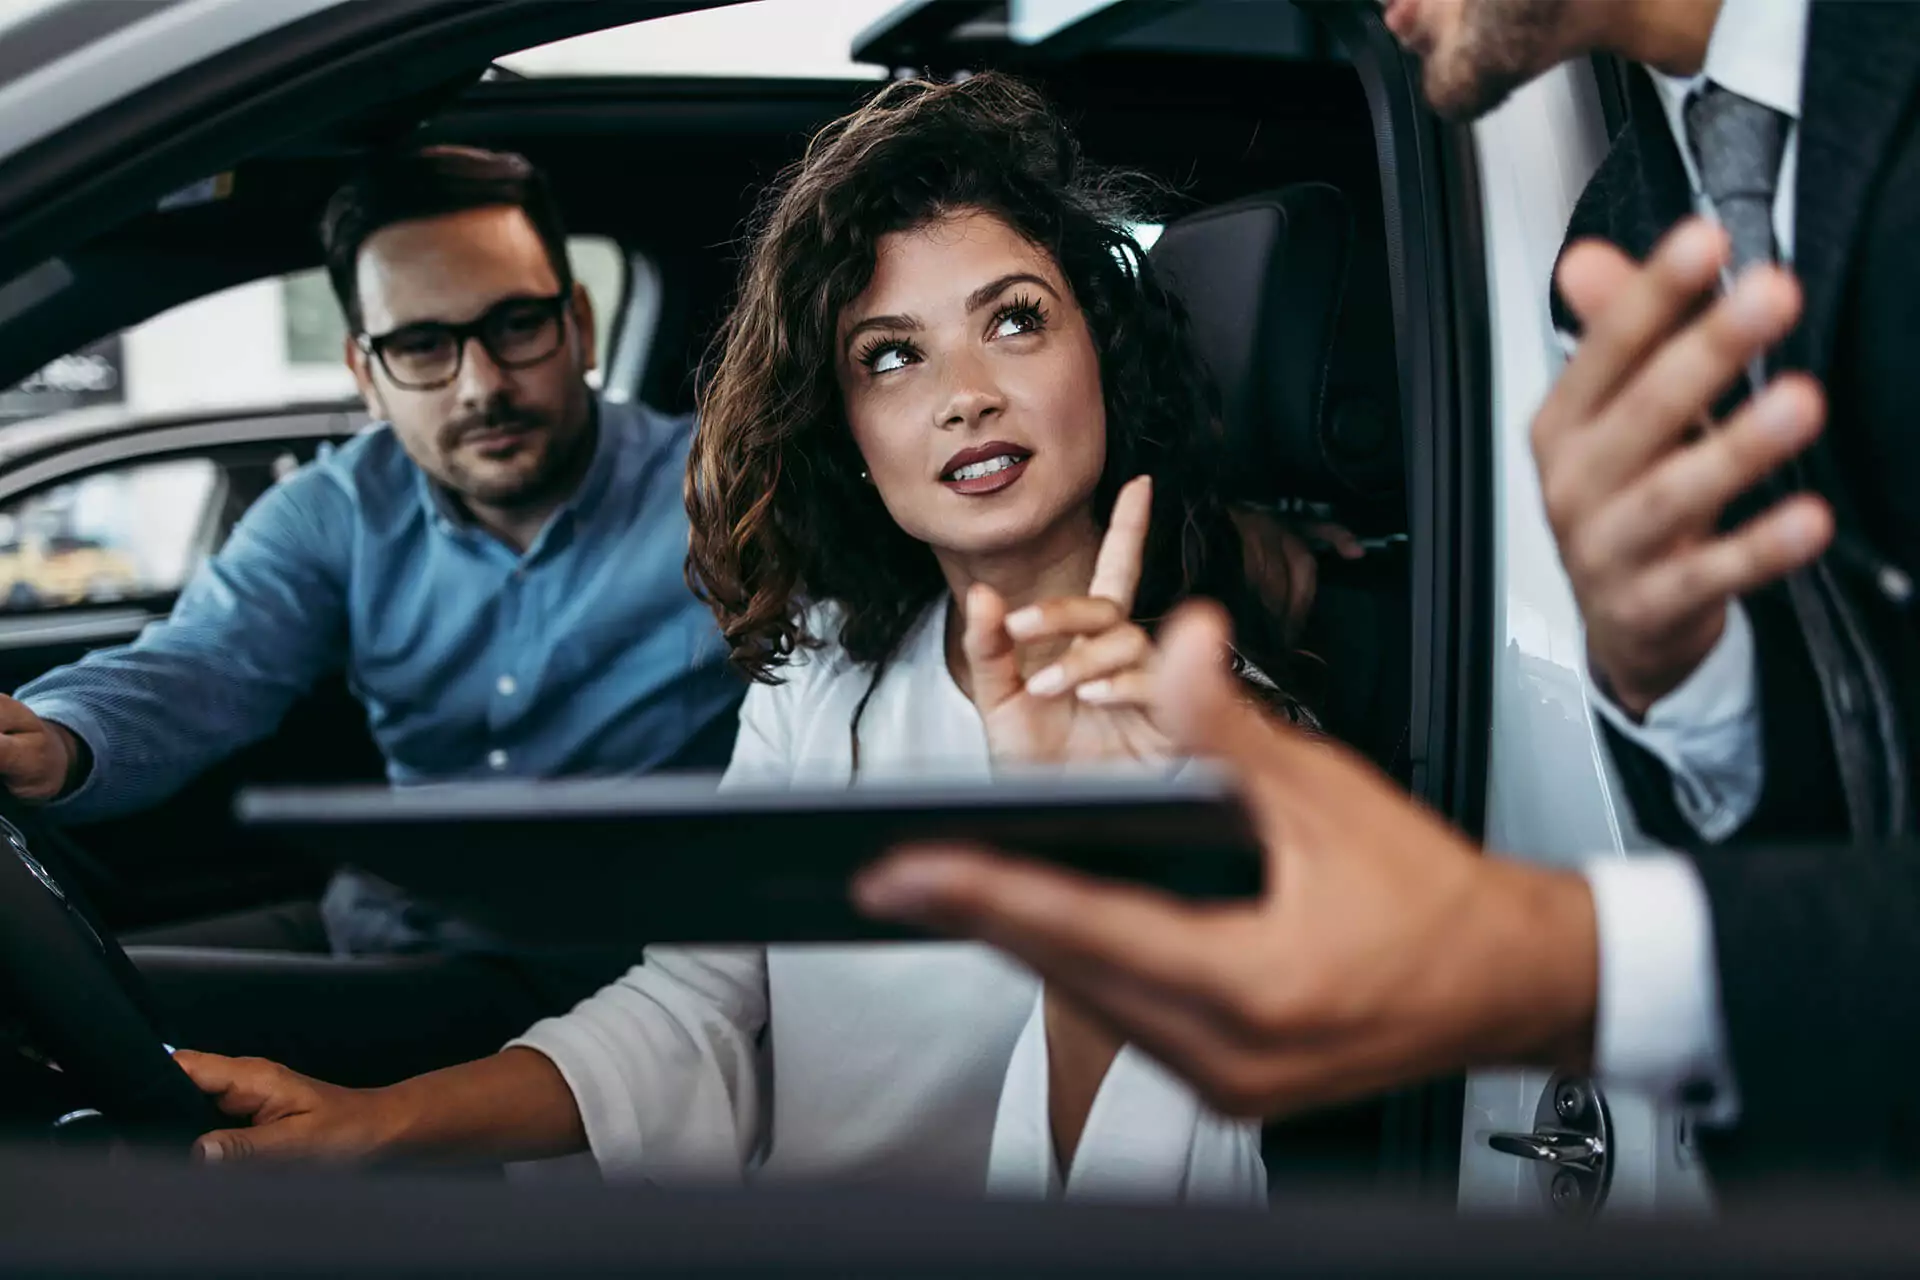 Woman in driver’s seat of a car looking at a salesman’s tablet with man in passenger seat